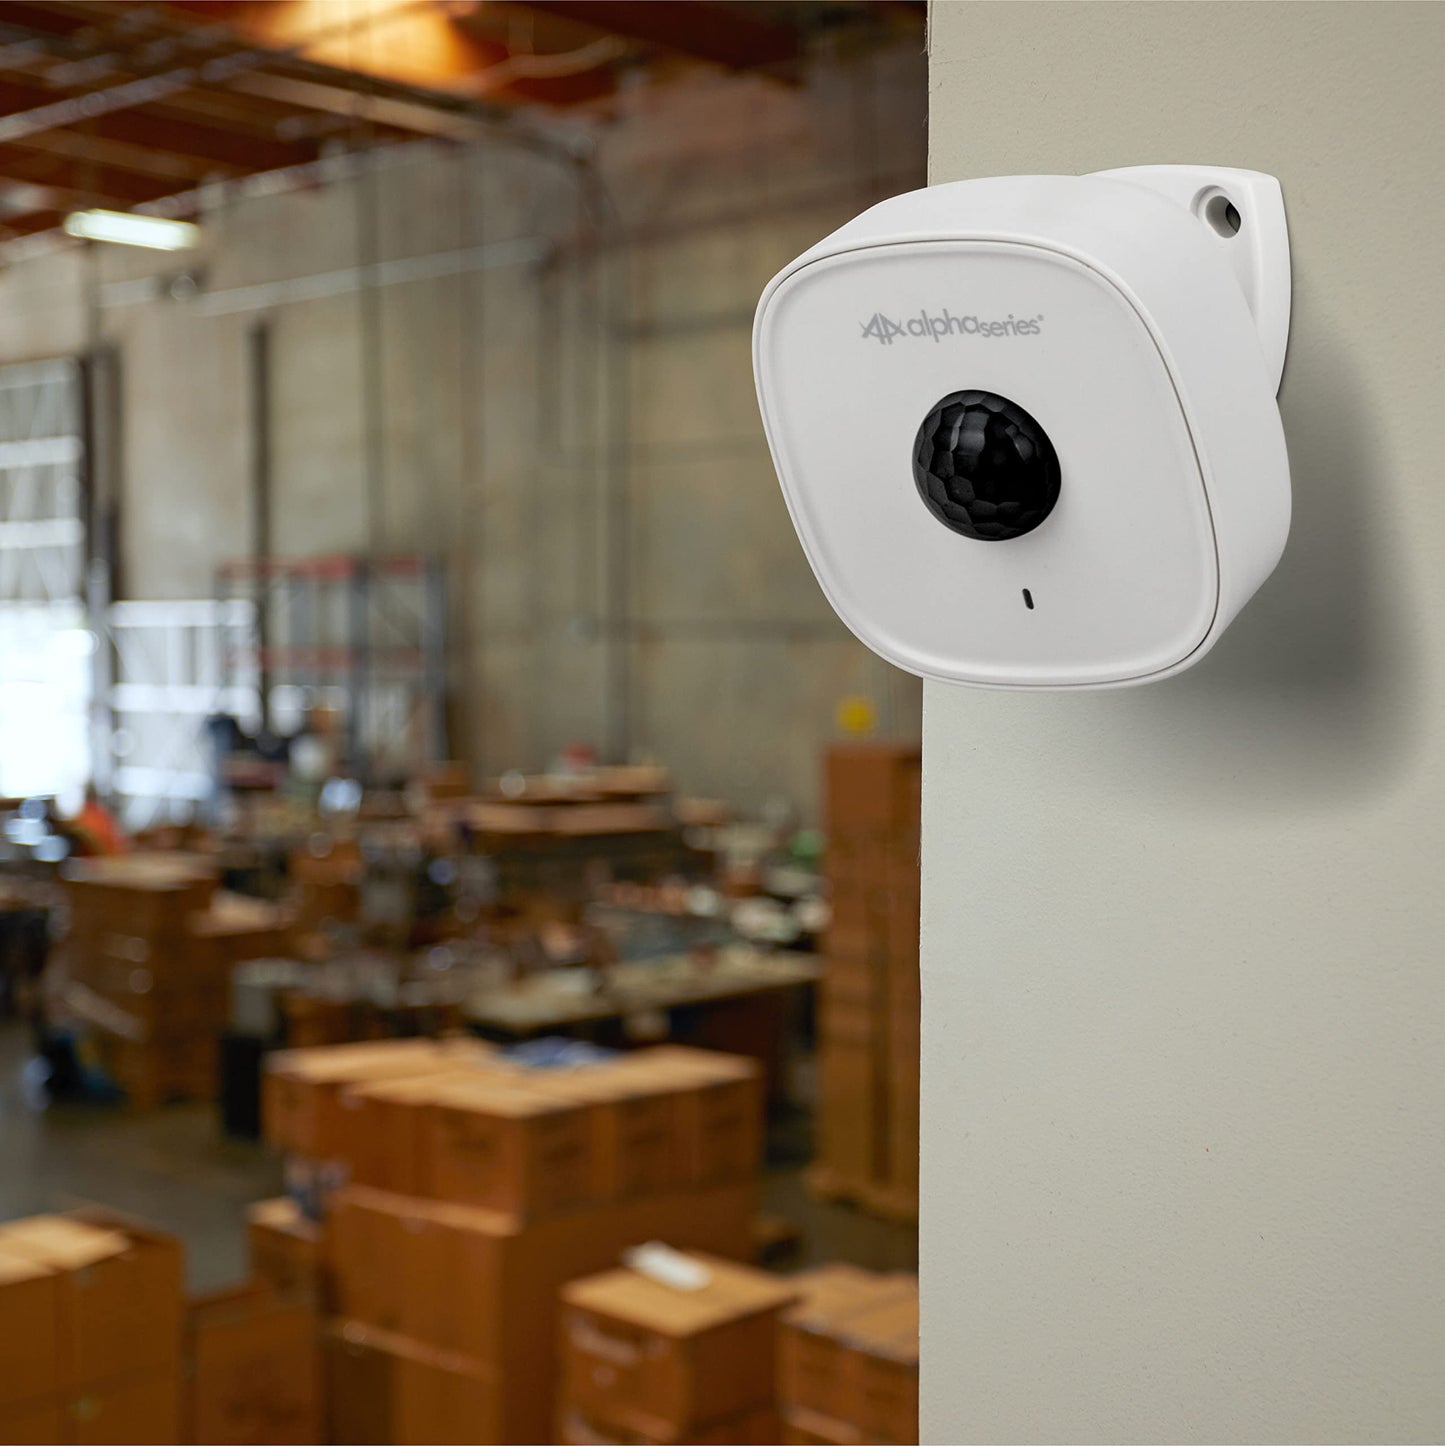 Swann Alpha Series Wireless Motion Sensor Unit & Chime. Easy Installation Both Indoors & Outdoors with Strong Weatherproof Design. Detect Movement Up To 13ft Away. Completely Wireless, Battery Powered